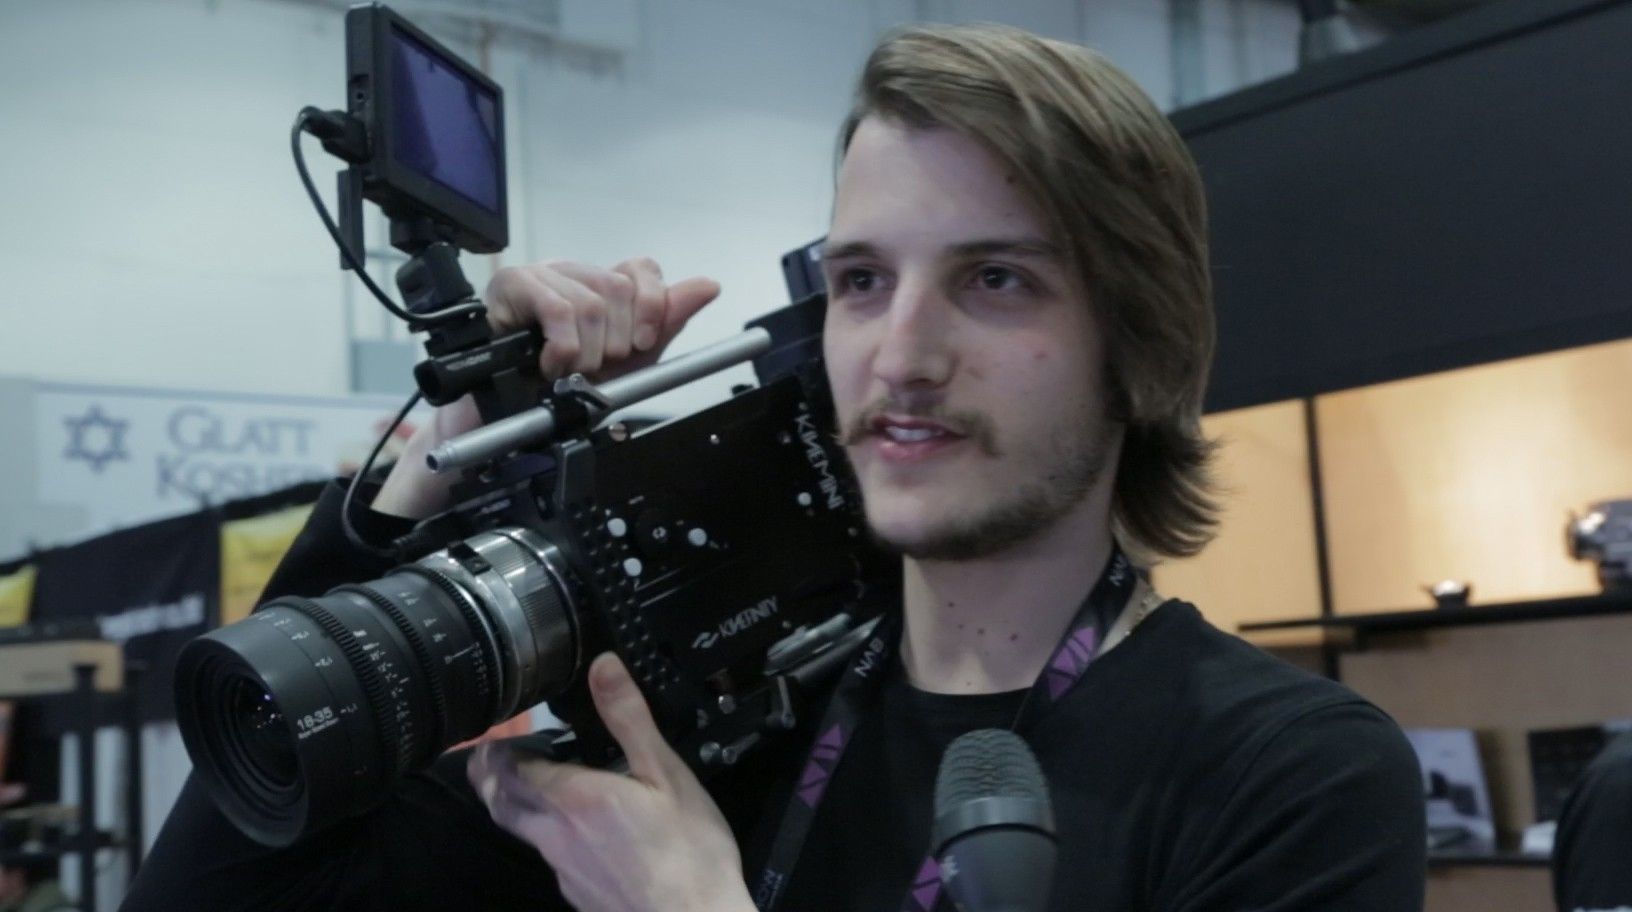 Kinefinity 6K for $10K Camera Coming in 2014, Plus a Look at the Sub ...